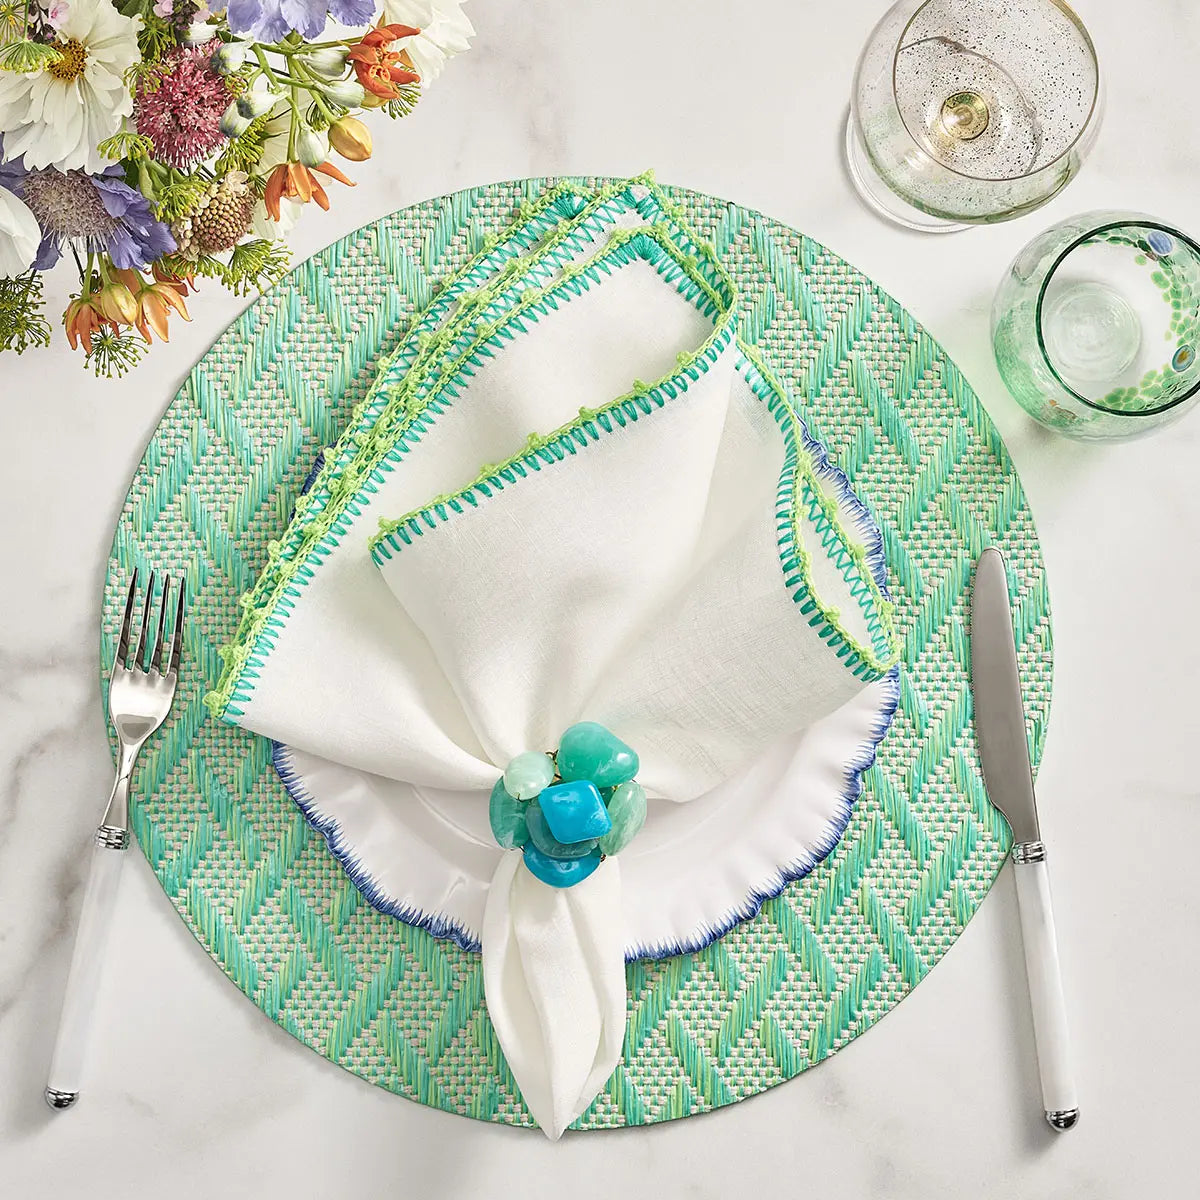 Kim Seybert Basketweave Placemat in Marine Lime set on a table with dinnerware